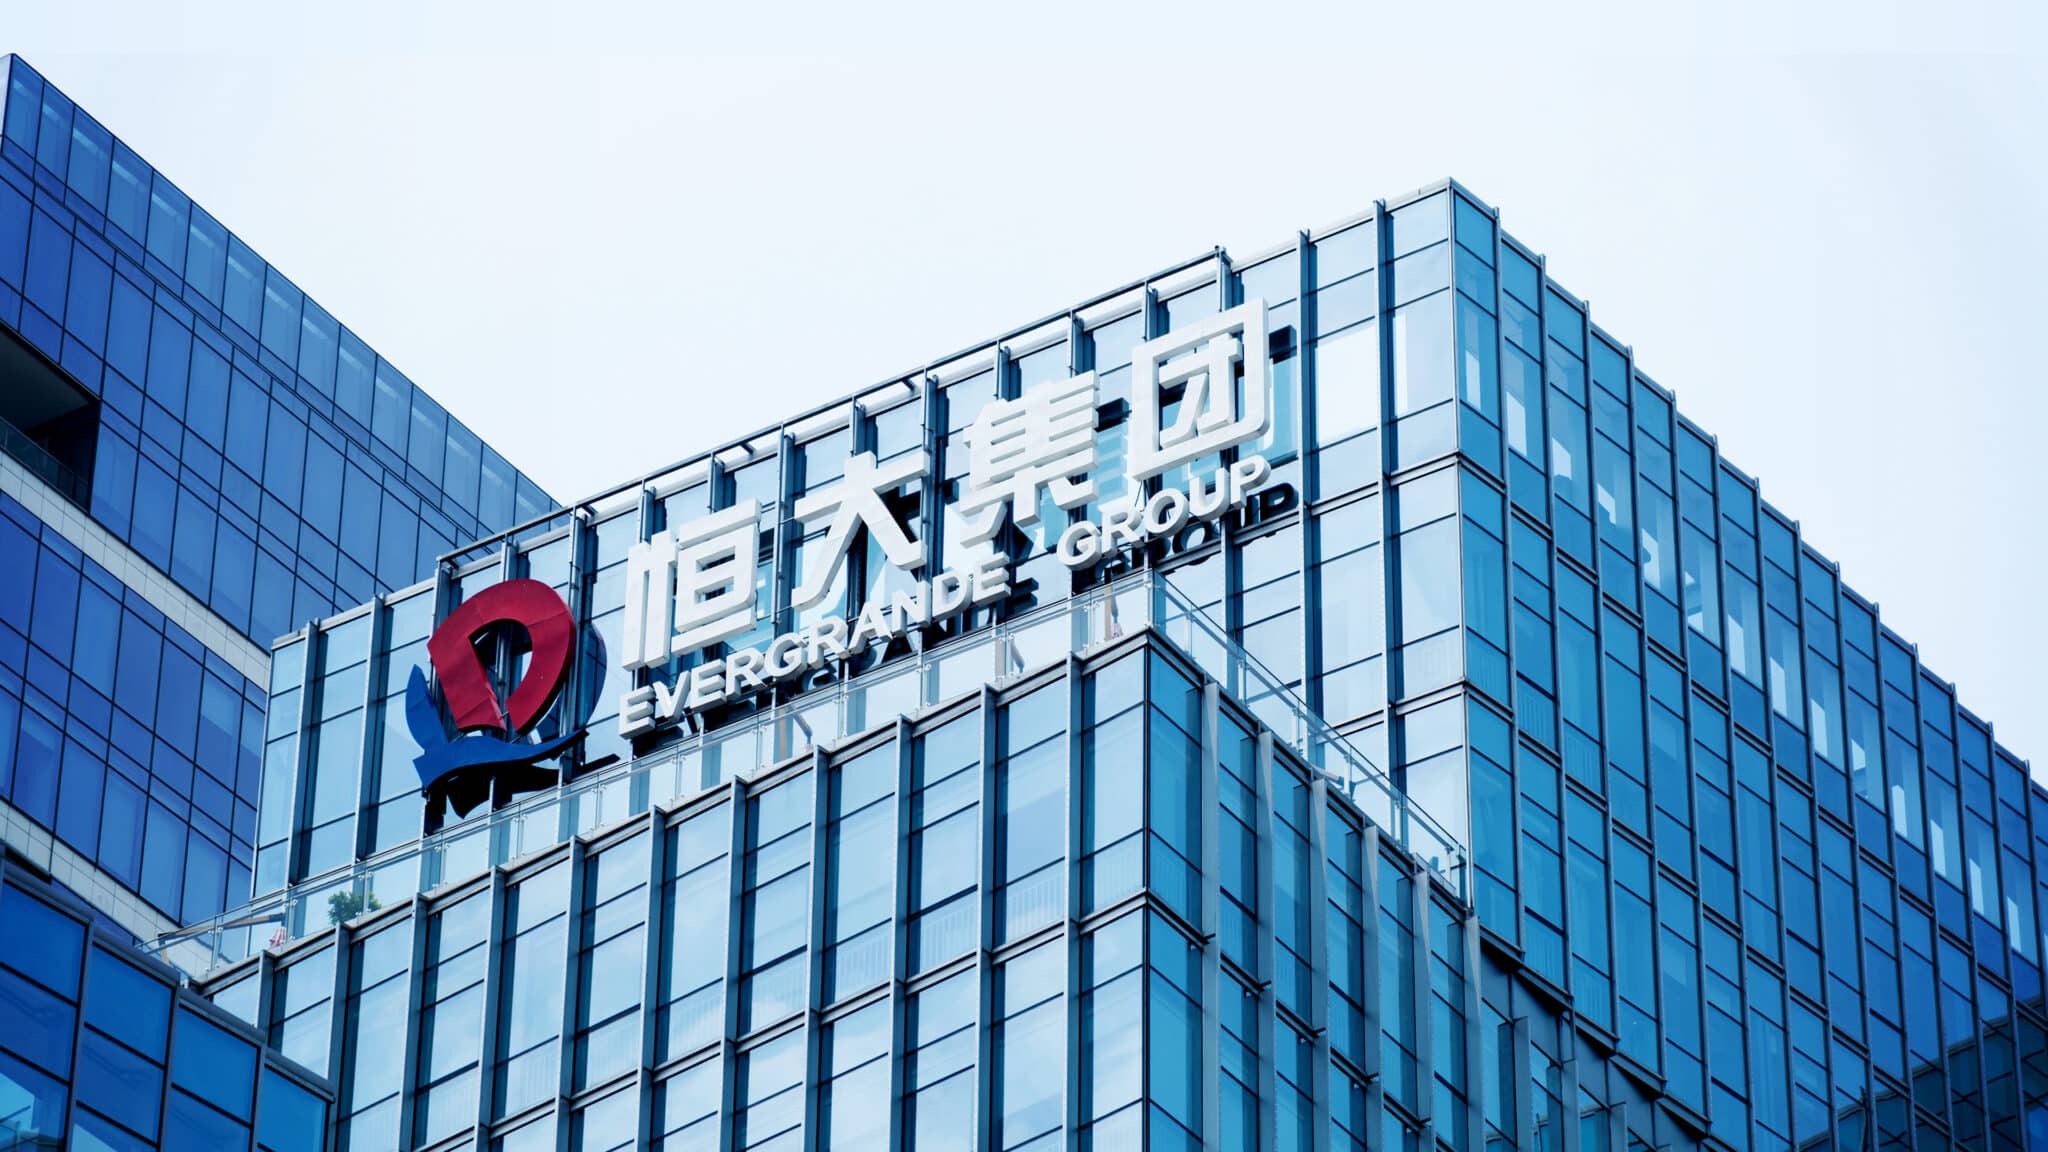 How the situation with Evergrande could benefit property investors